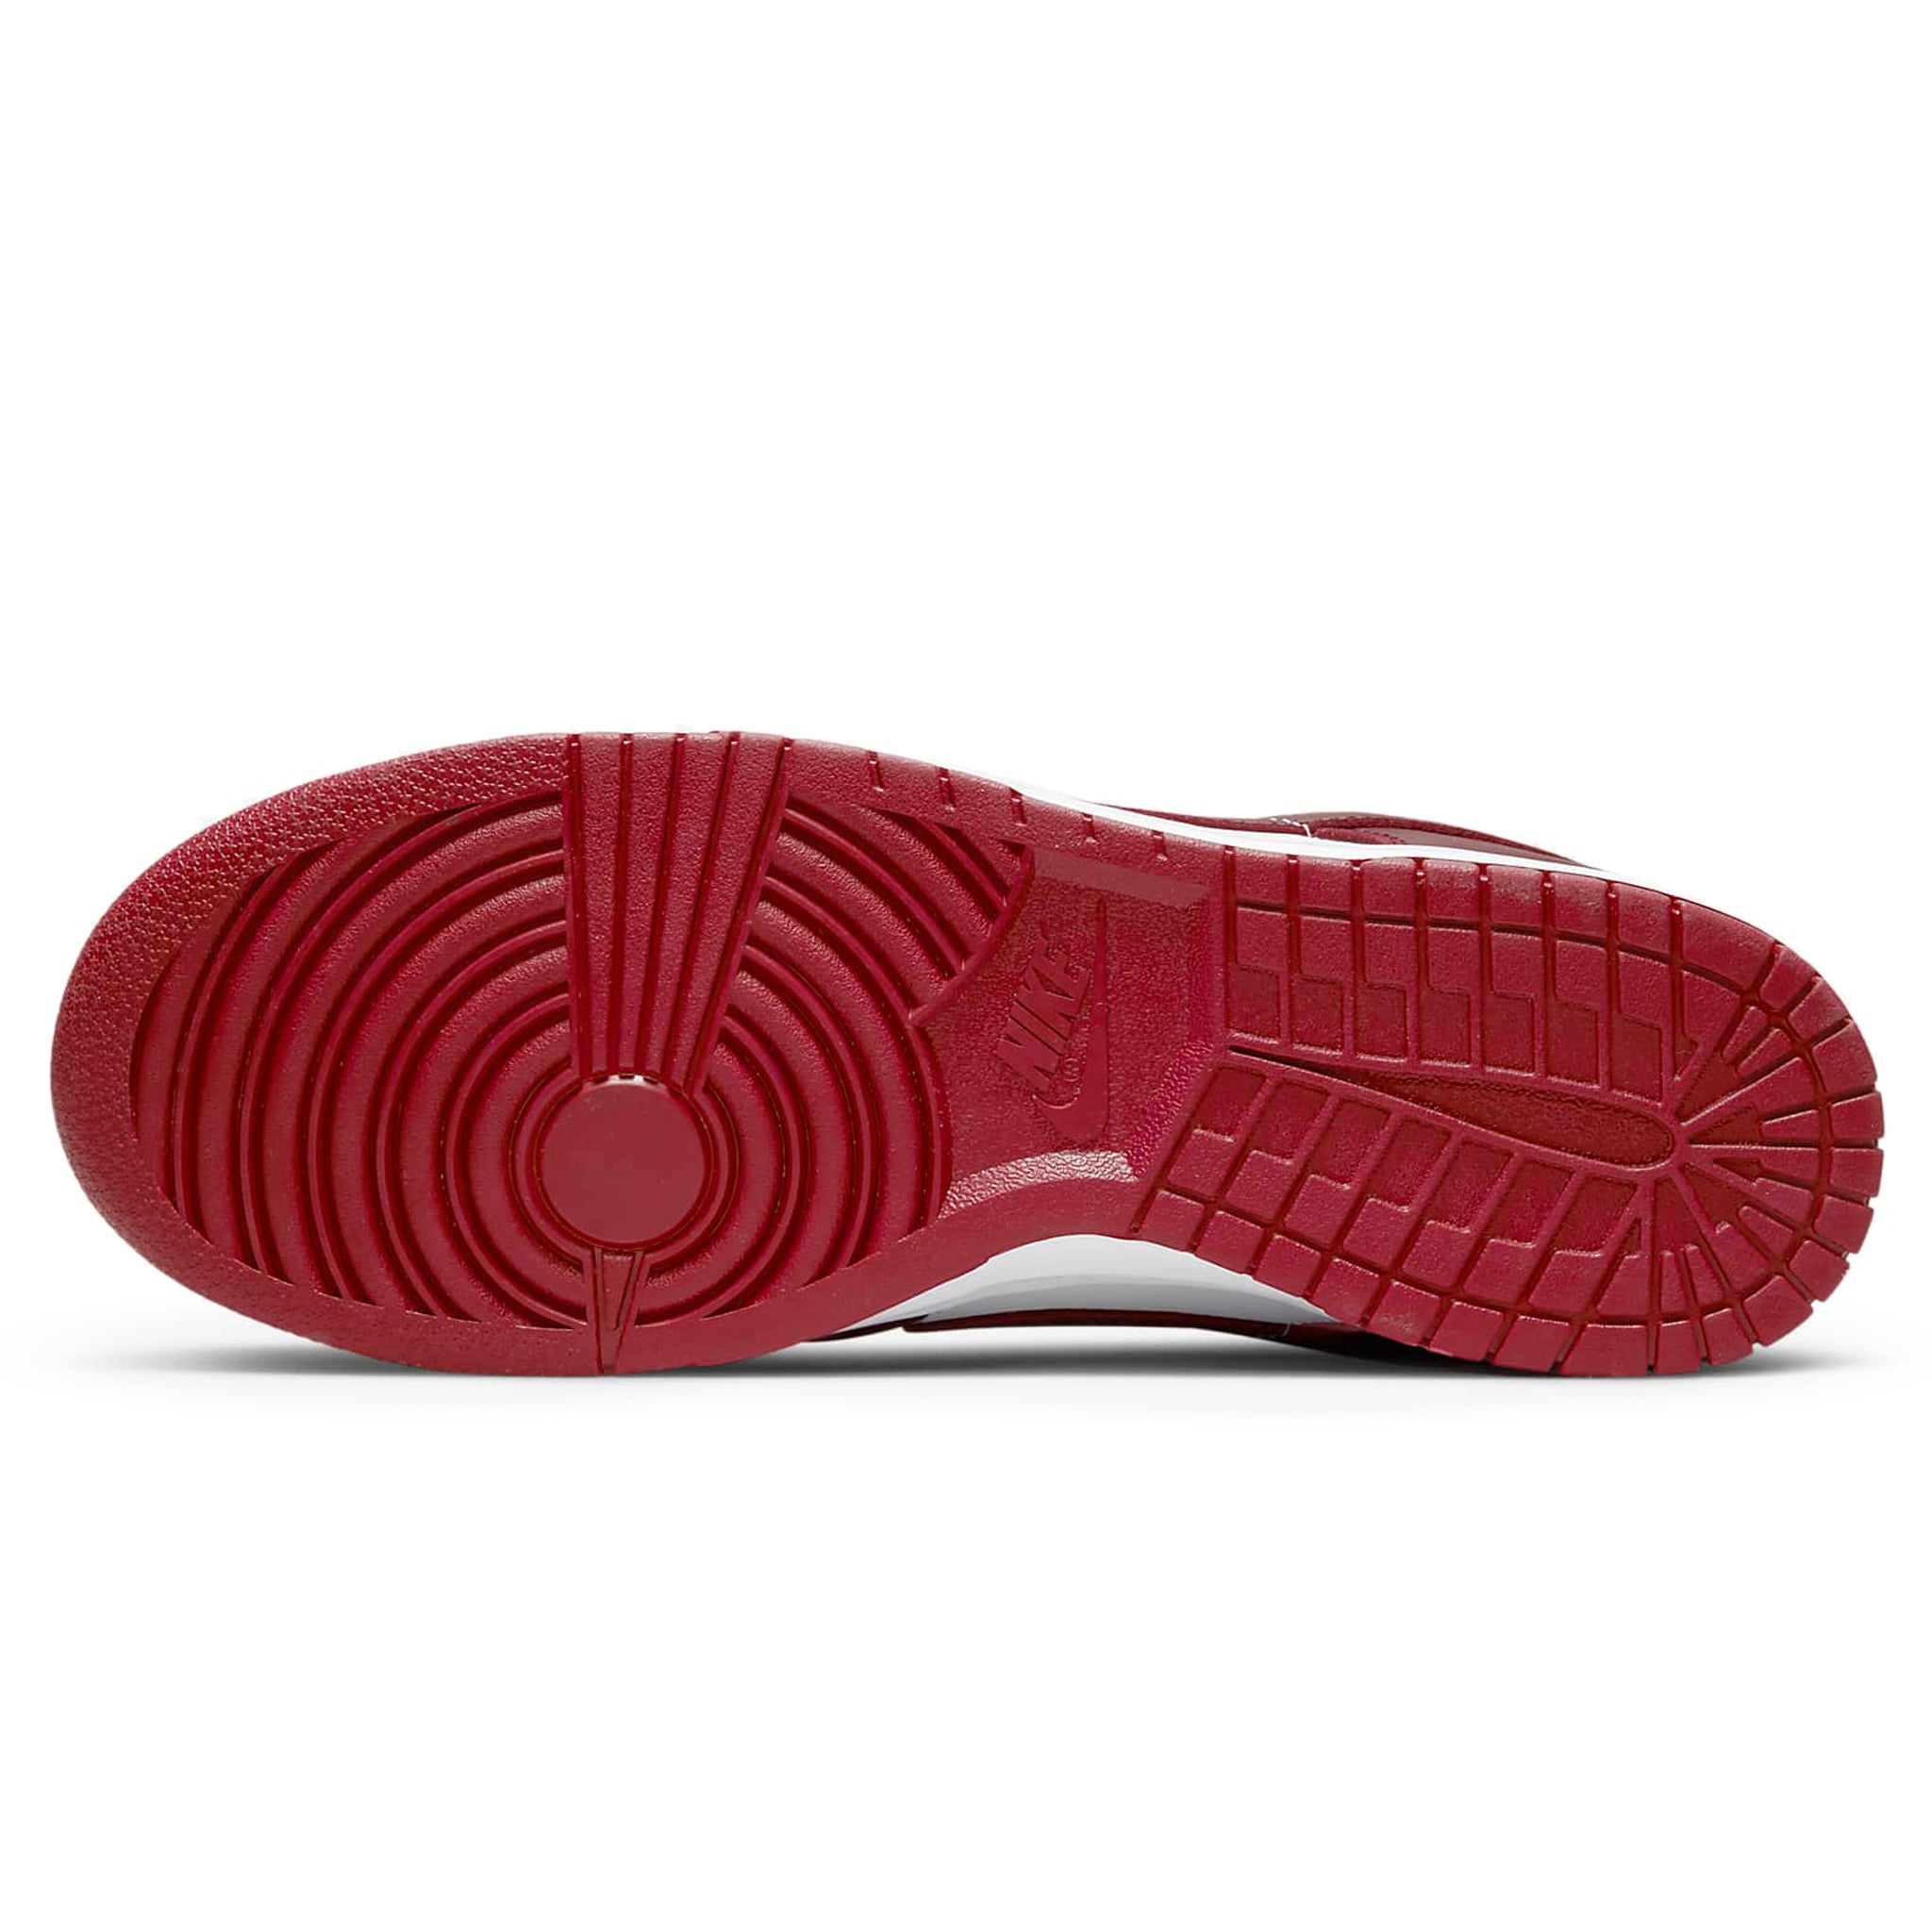 Sole view of Nike Dunk Low Team Red D1391-601